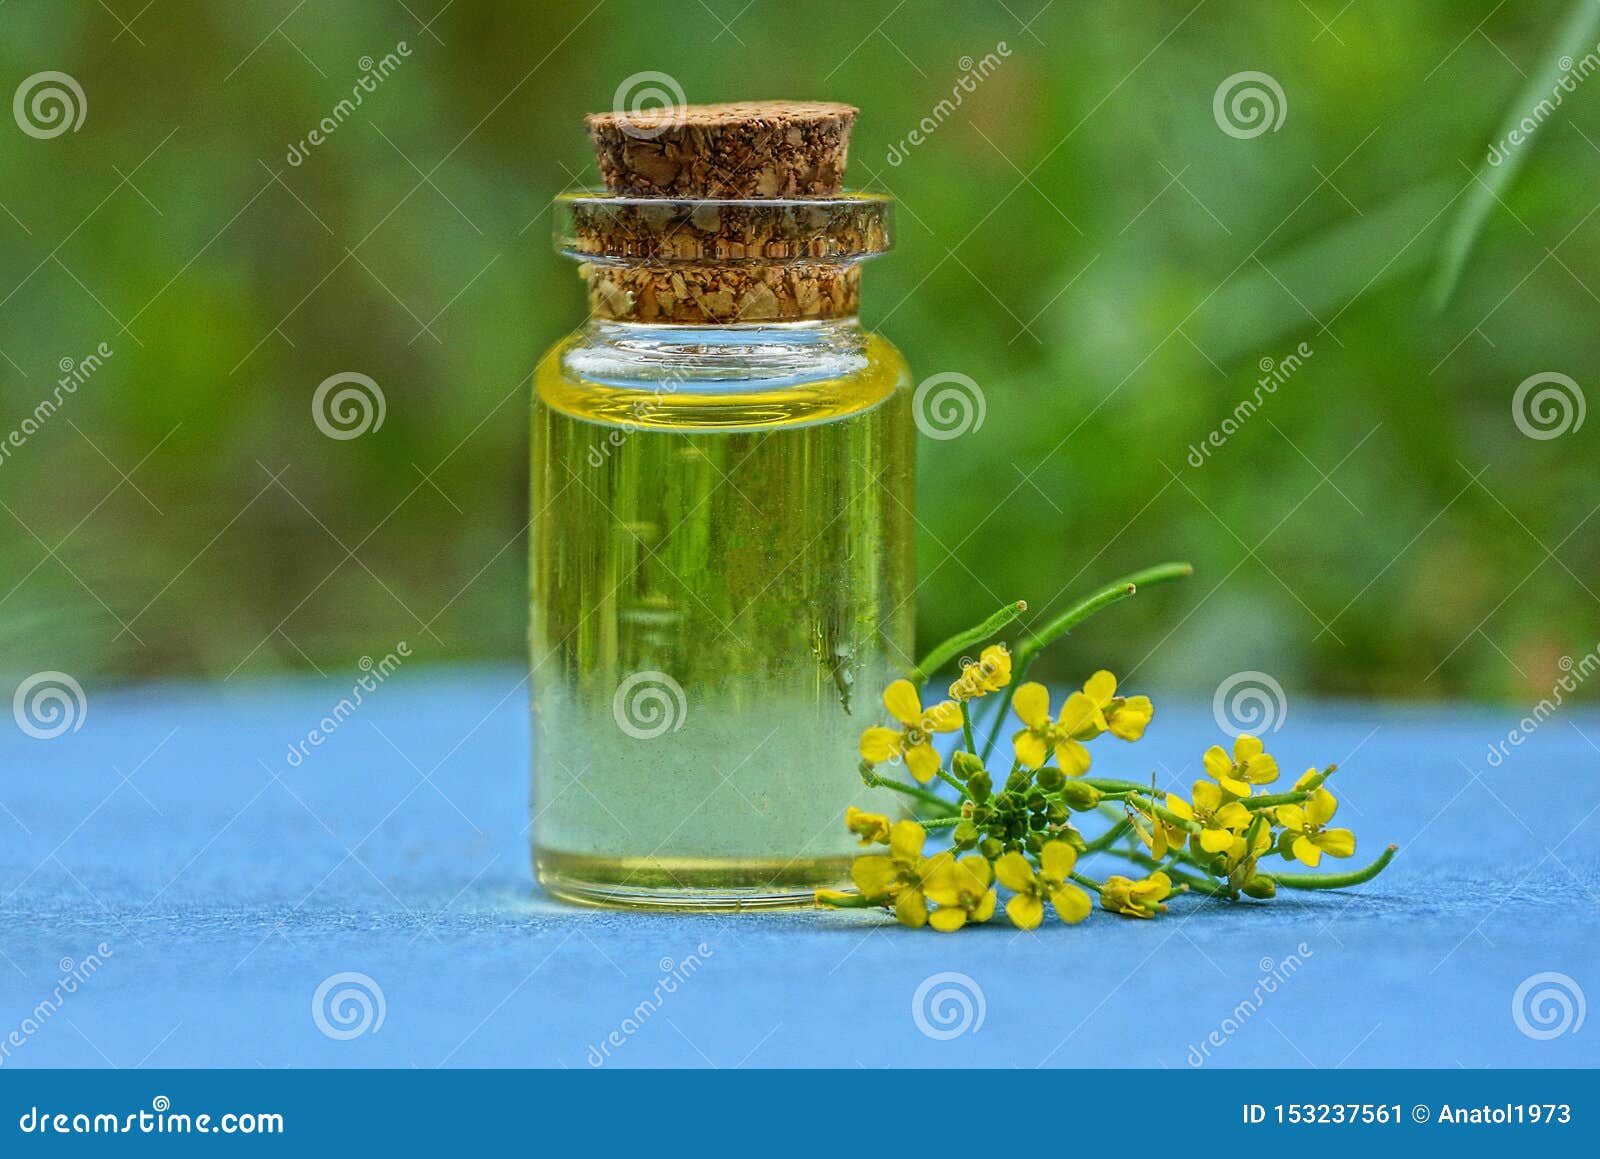 Download Small Glass Bottle With Oil And Yellow Flowers Stock Image Image Of Beautiful Fragrant 153237561 Yellowimages Mockups